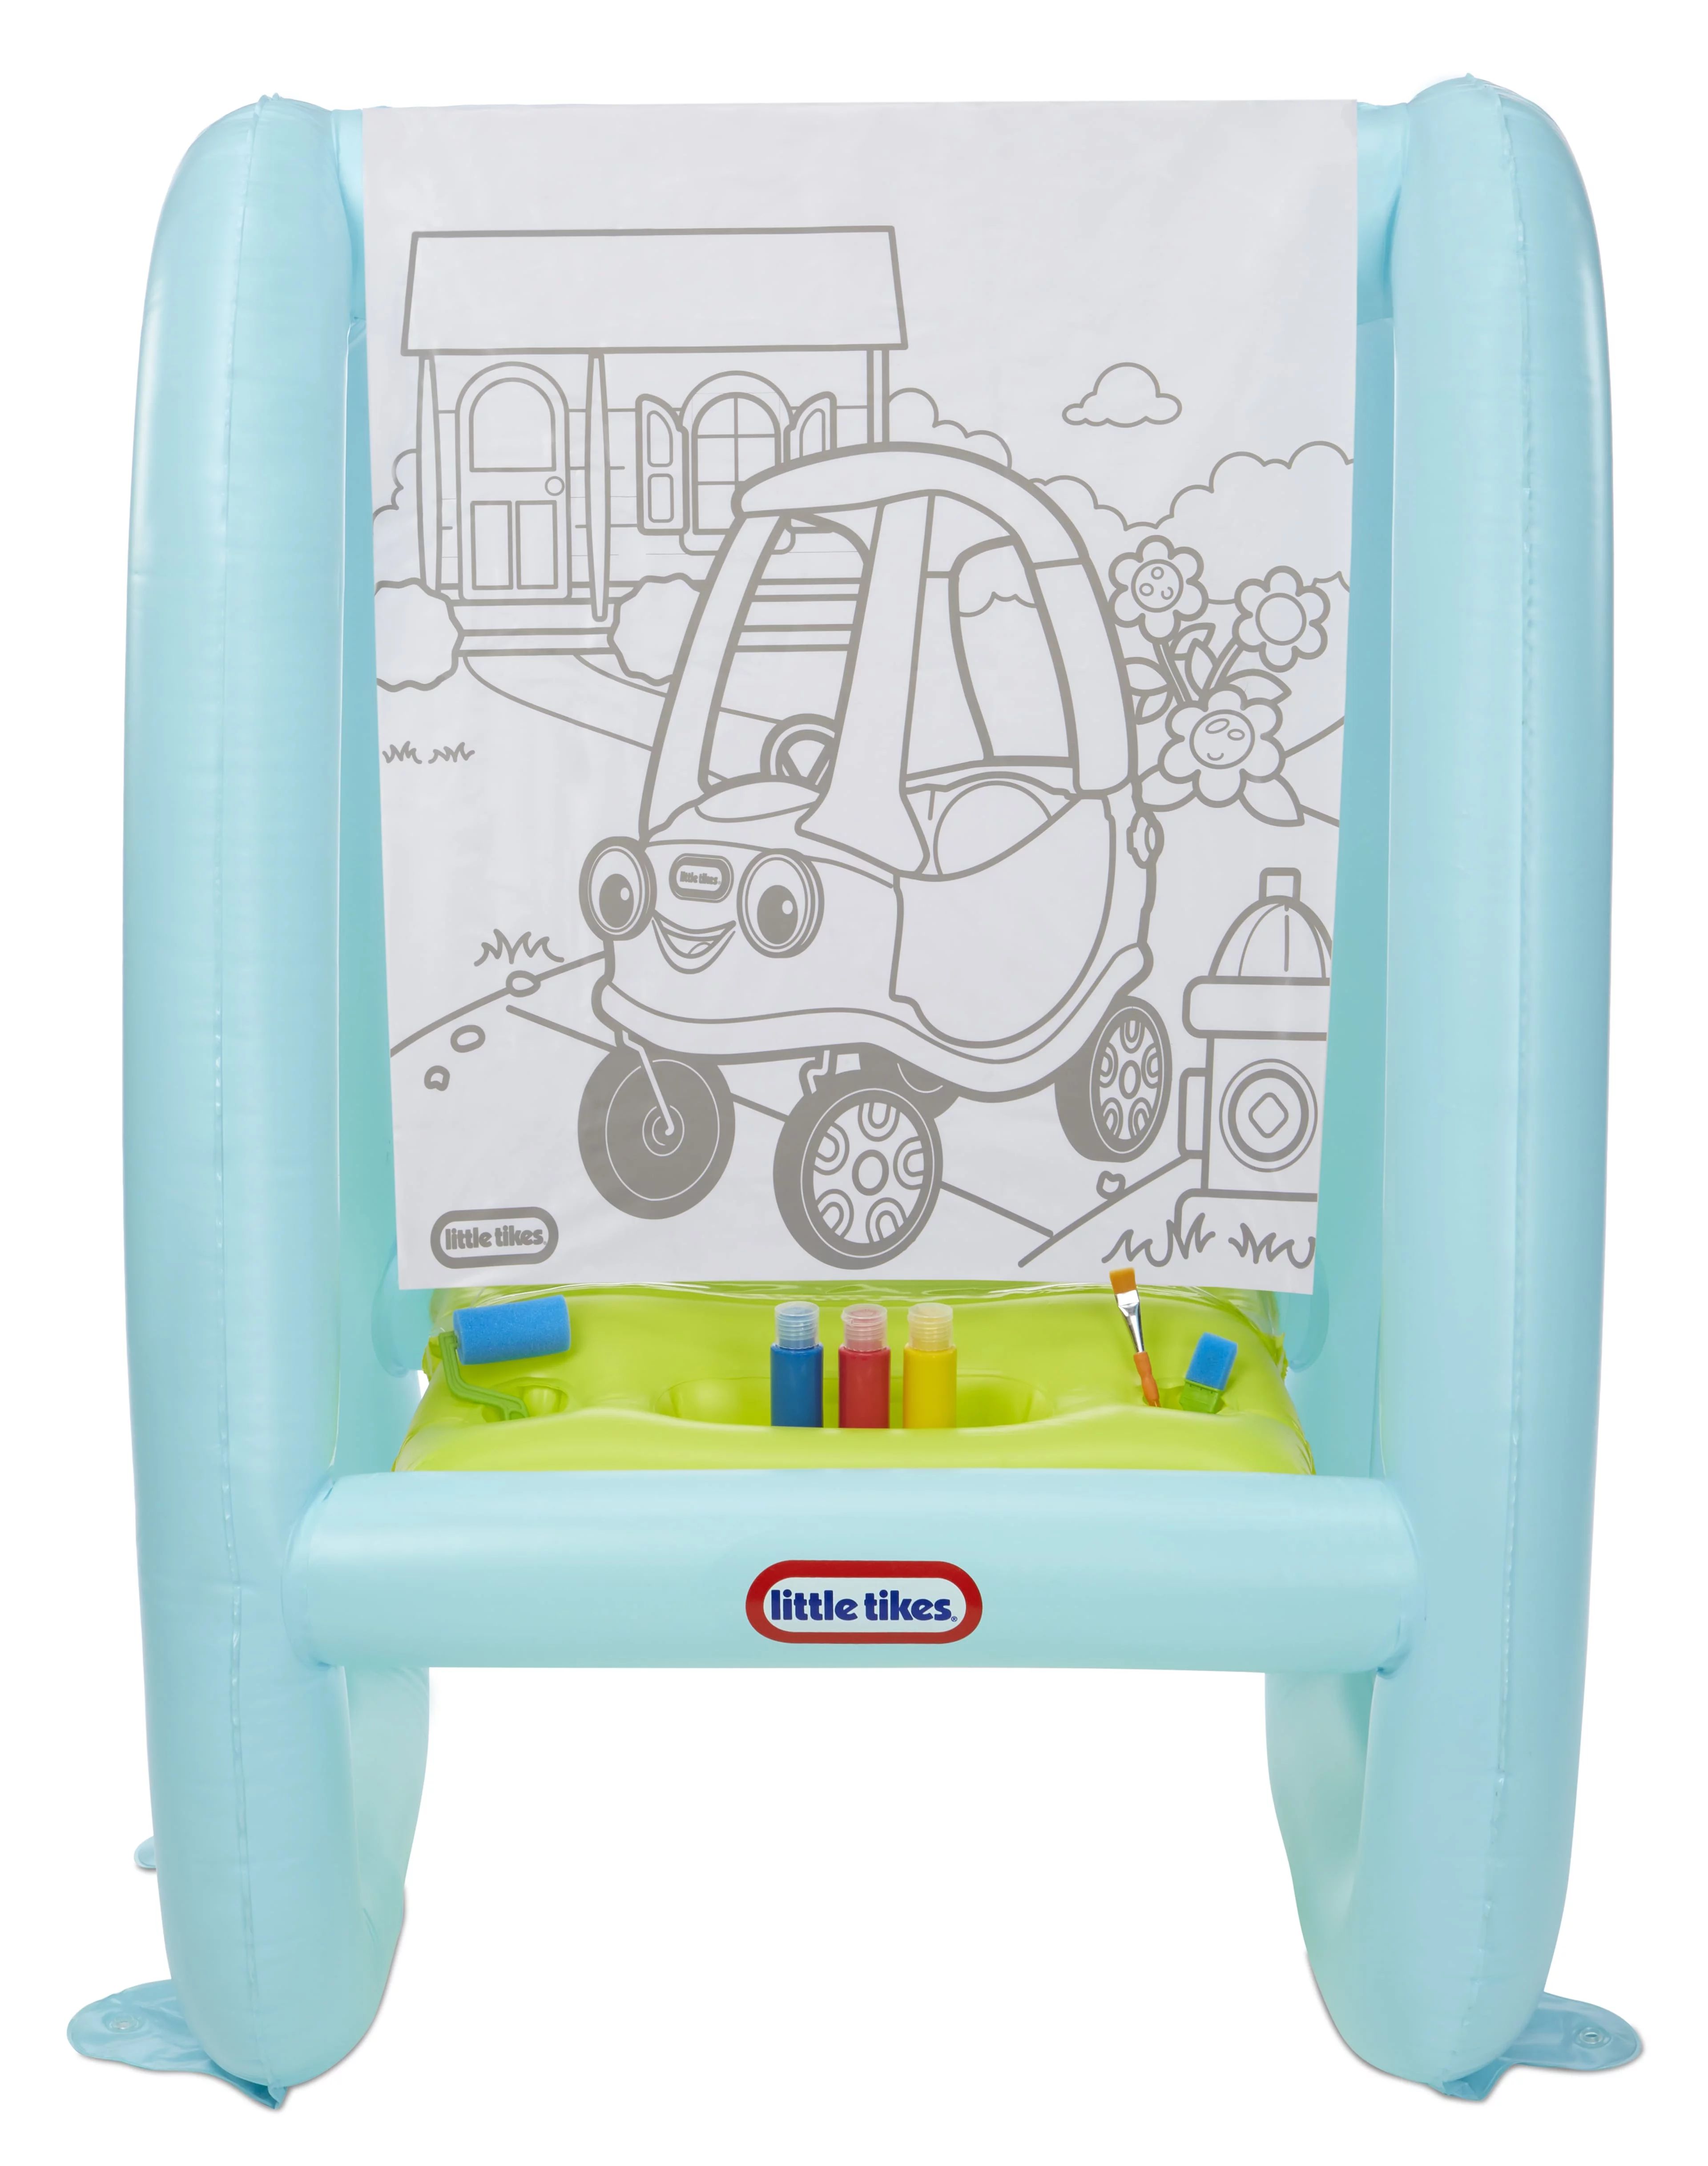 Little Tikes® 3-in-1 Paint & Play Backyard Easel Inflatable Outdoor Art with Accessories for Kid... | Walmart (US)